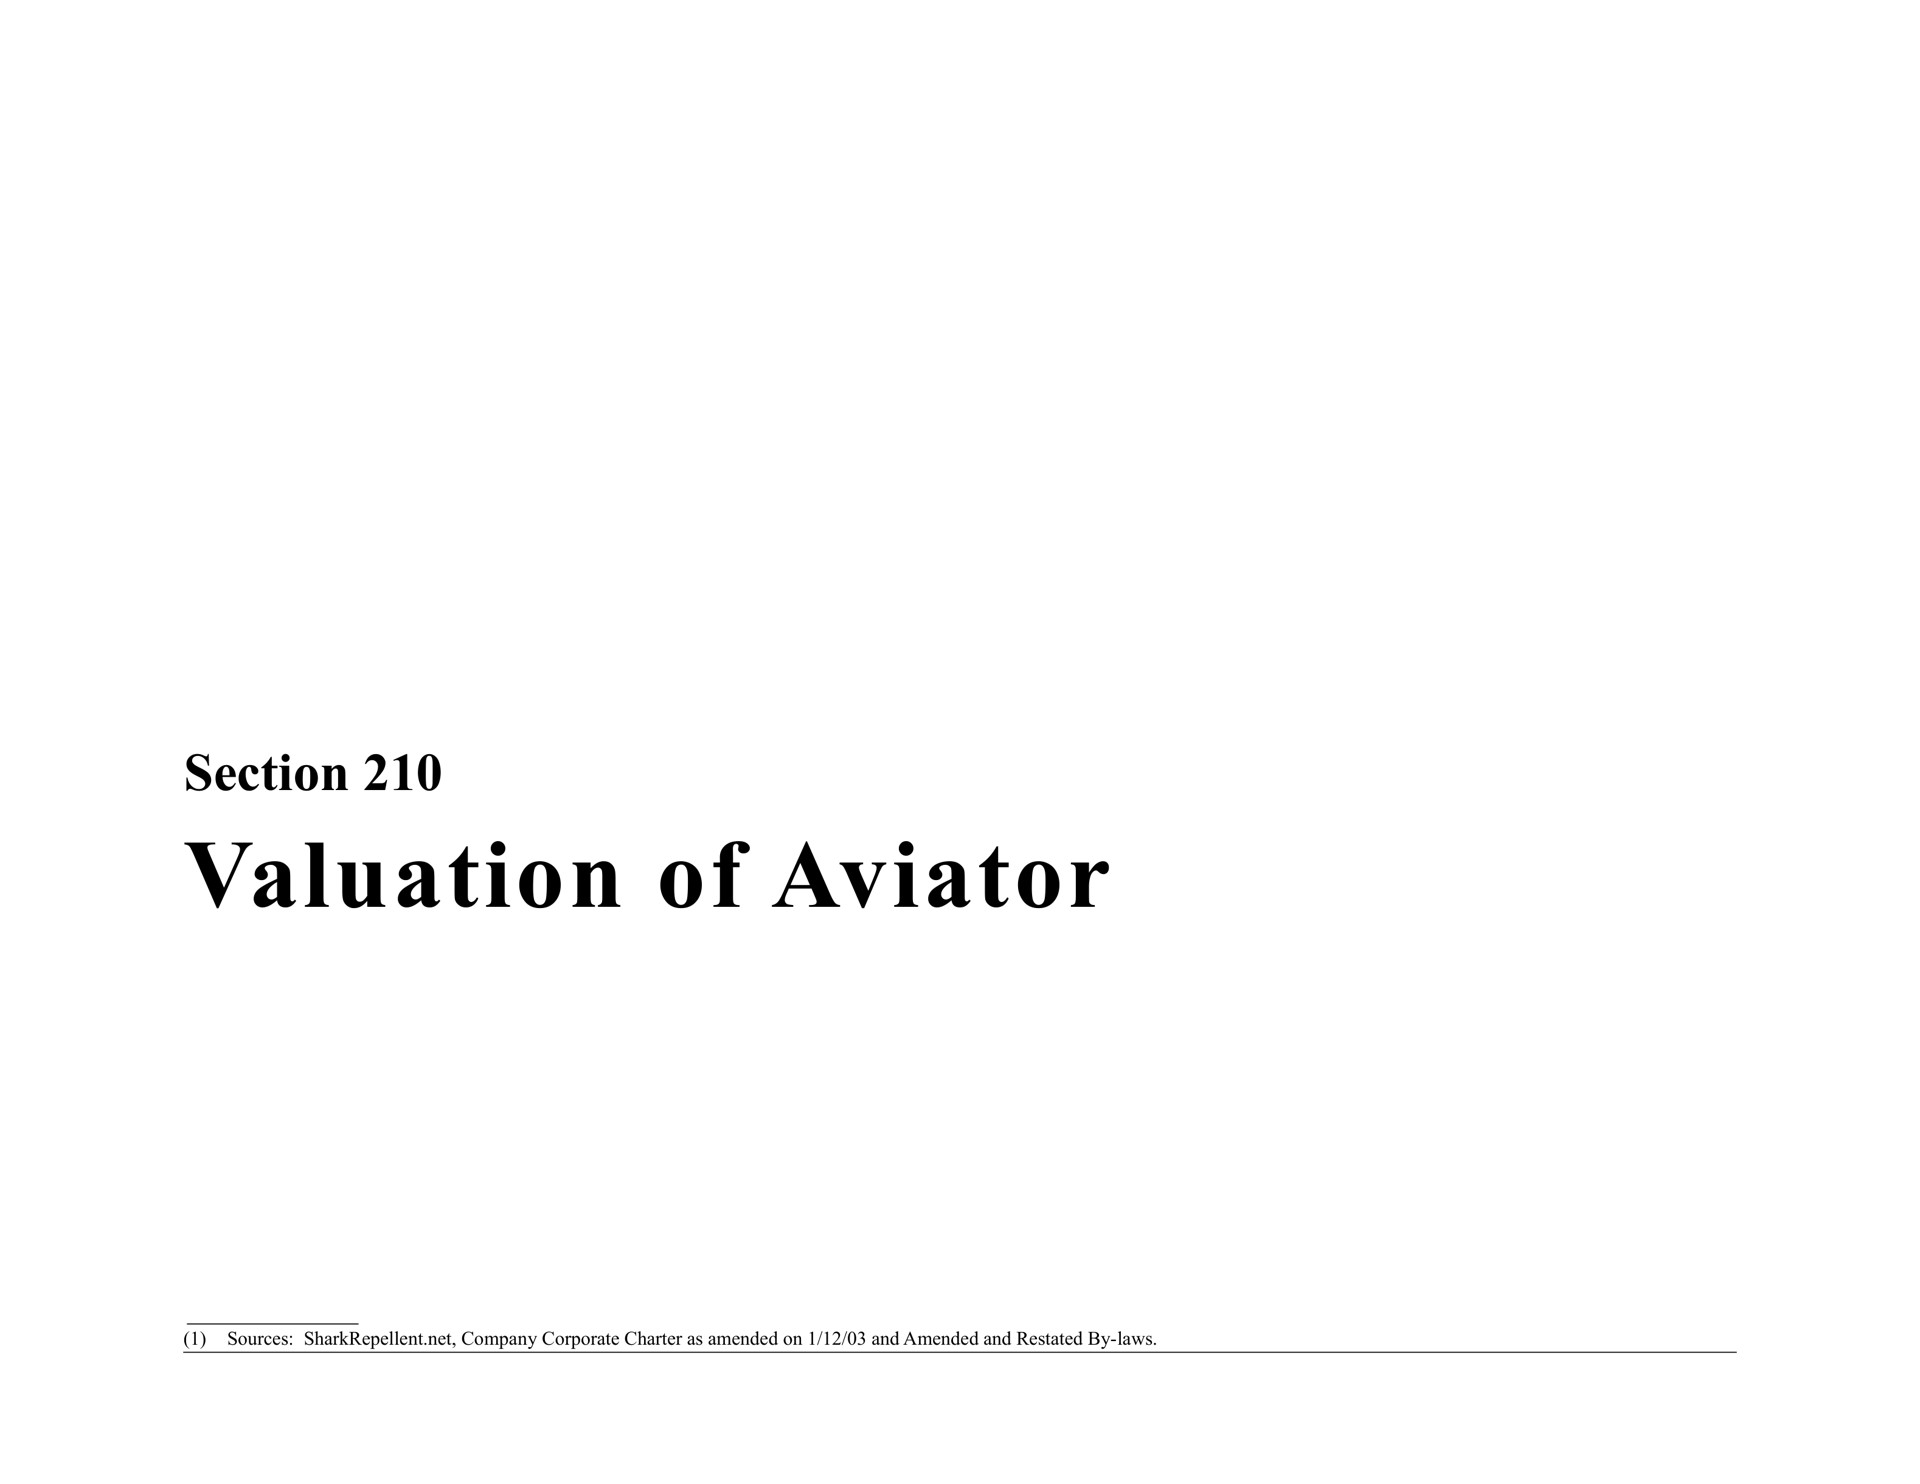 section valuation of aviator | Bear Stearns